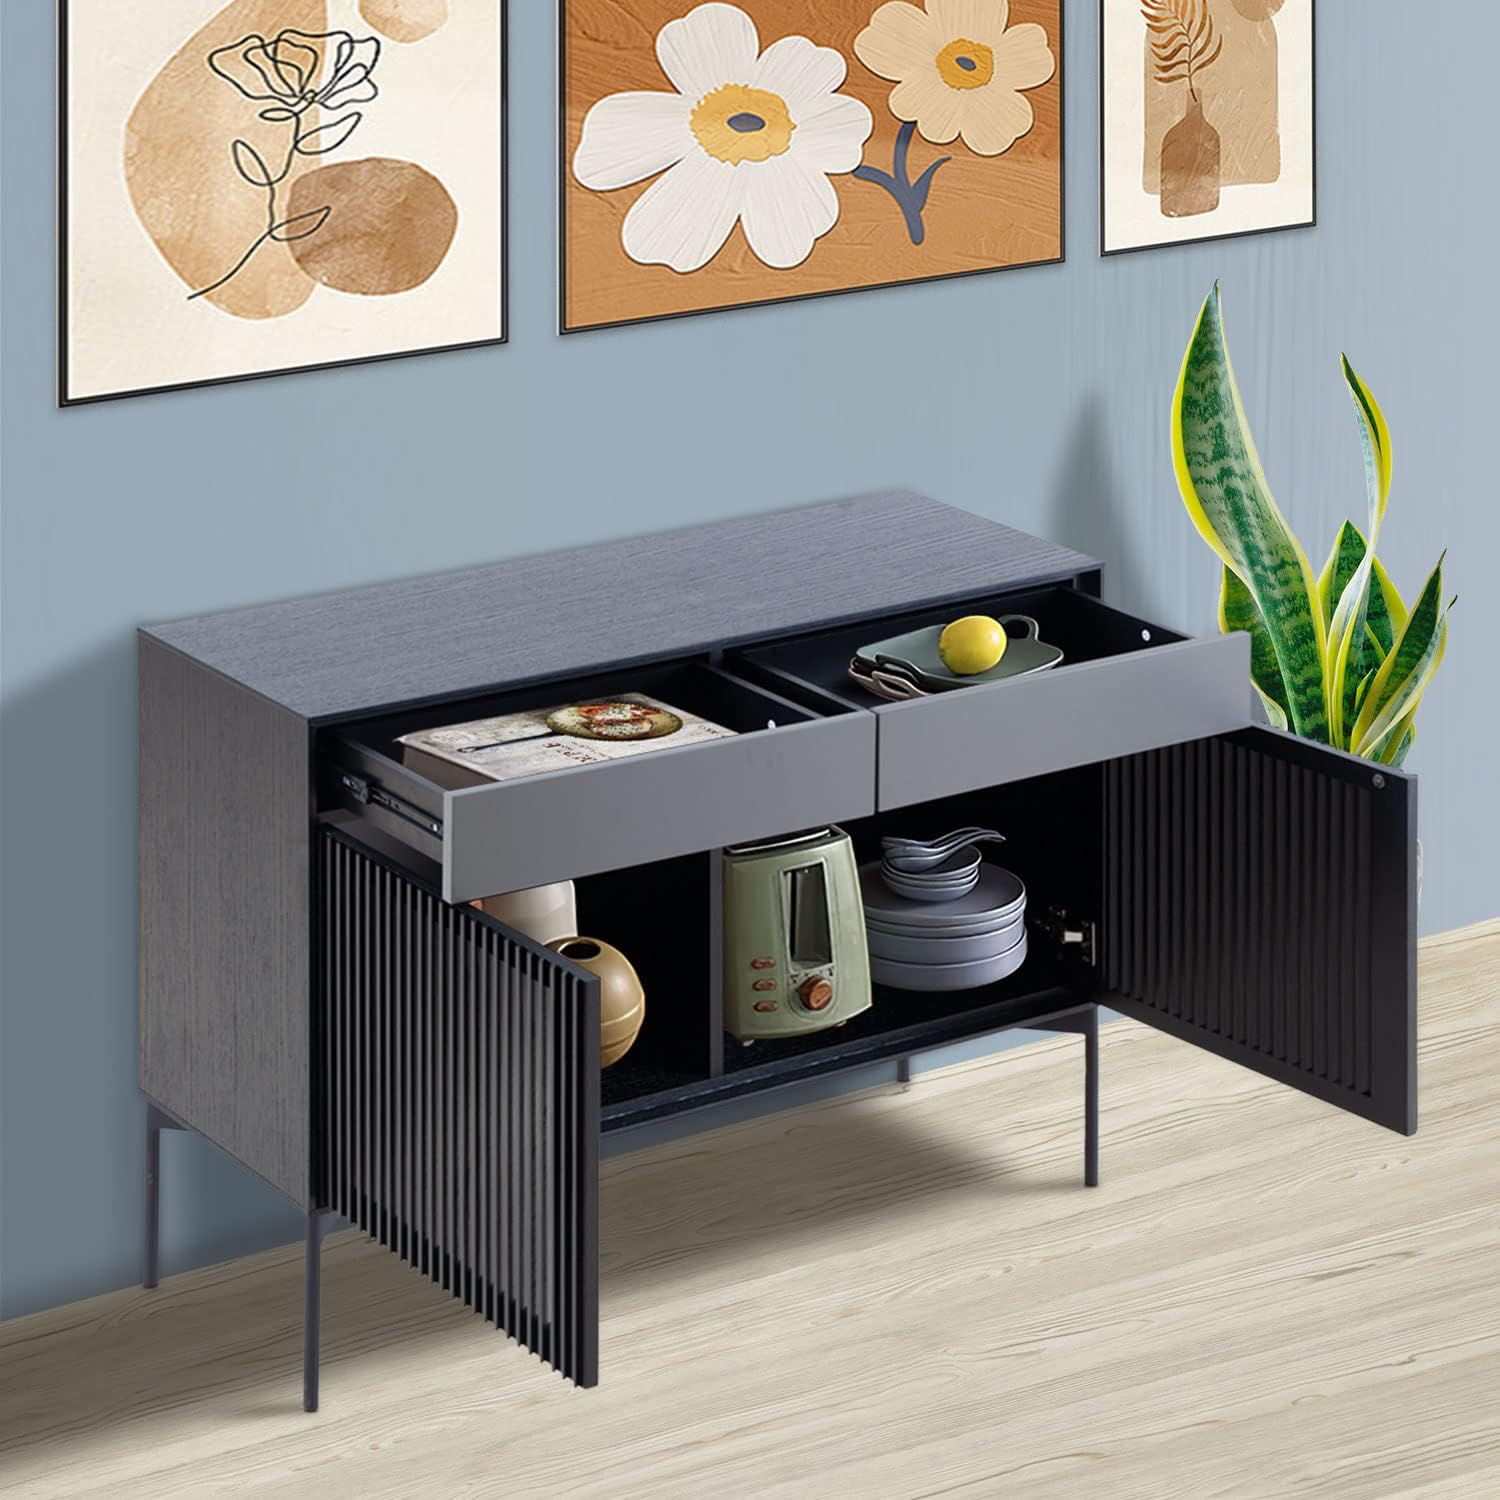 WILLIAMSPACE 43 Mid-Century Wood Cabinet Buffet Sideboard with 2 Drawers and 2 Louvered Door Storages, Floor Storage Cabinet, Side Standing Cupboard for Living Room, Kitchen - Matte Black & Grey